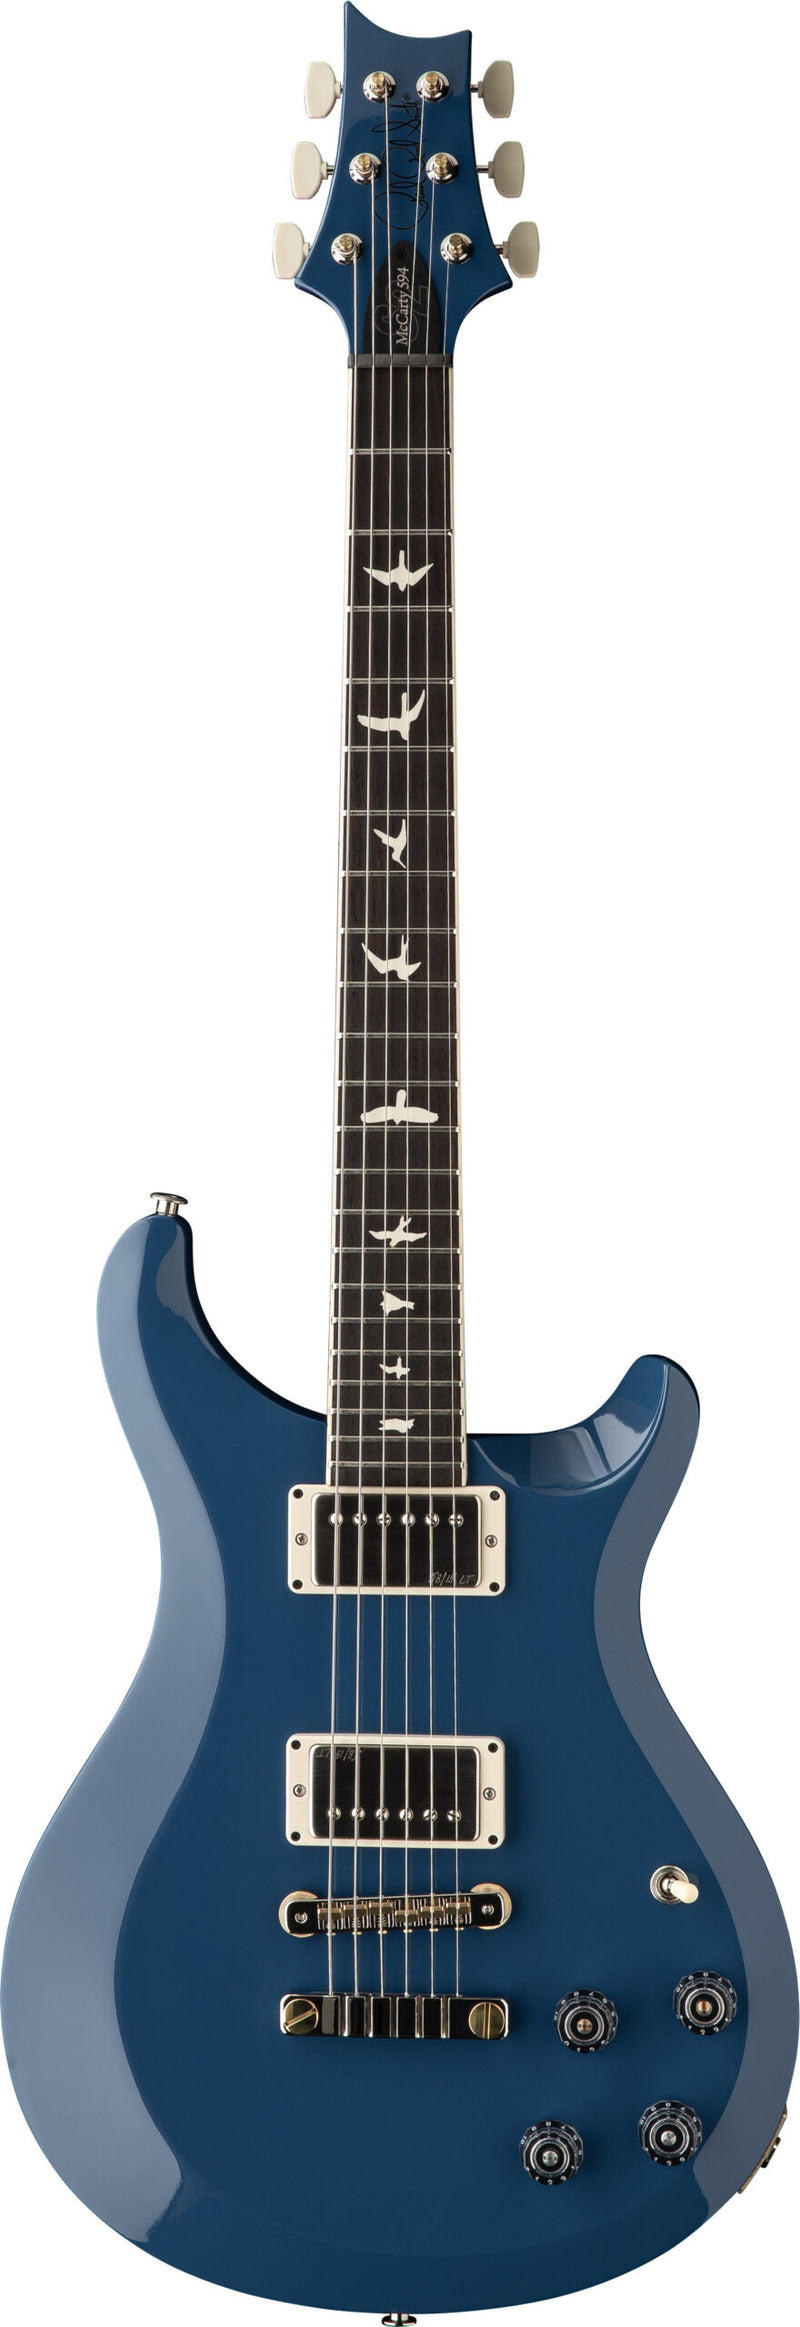 PRS S2 MCCARTY 594 THINLINE STANDARD Electric Guitar (Space Blue)